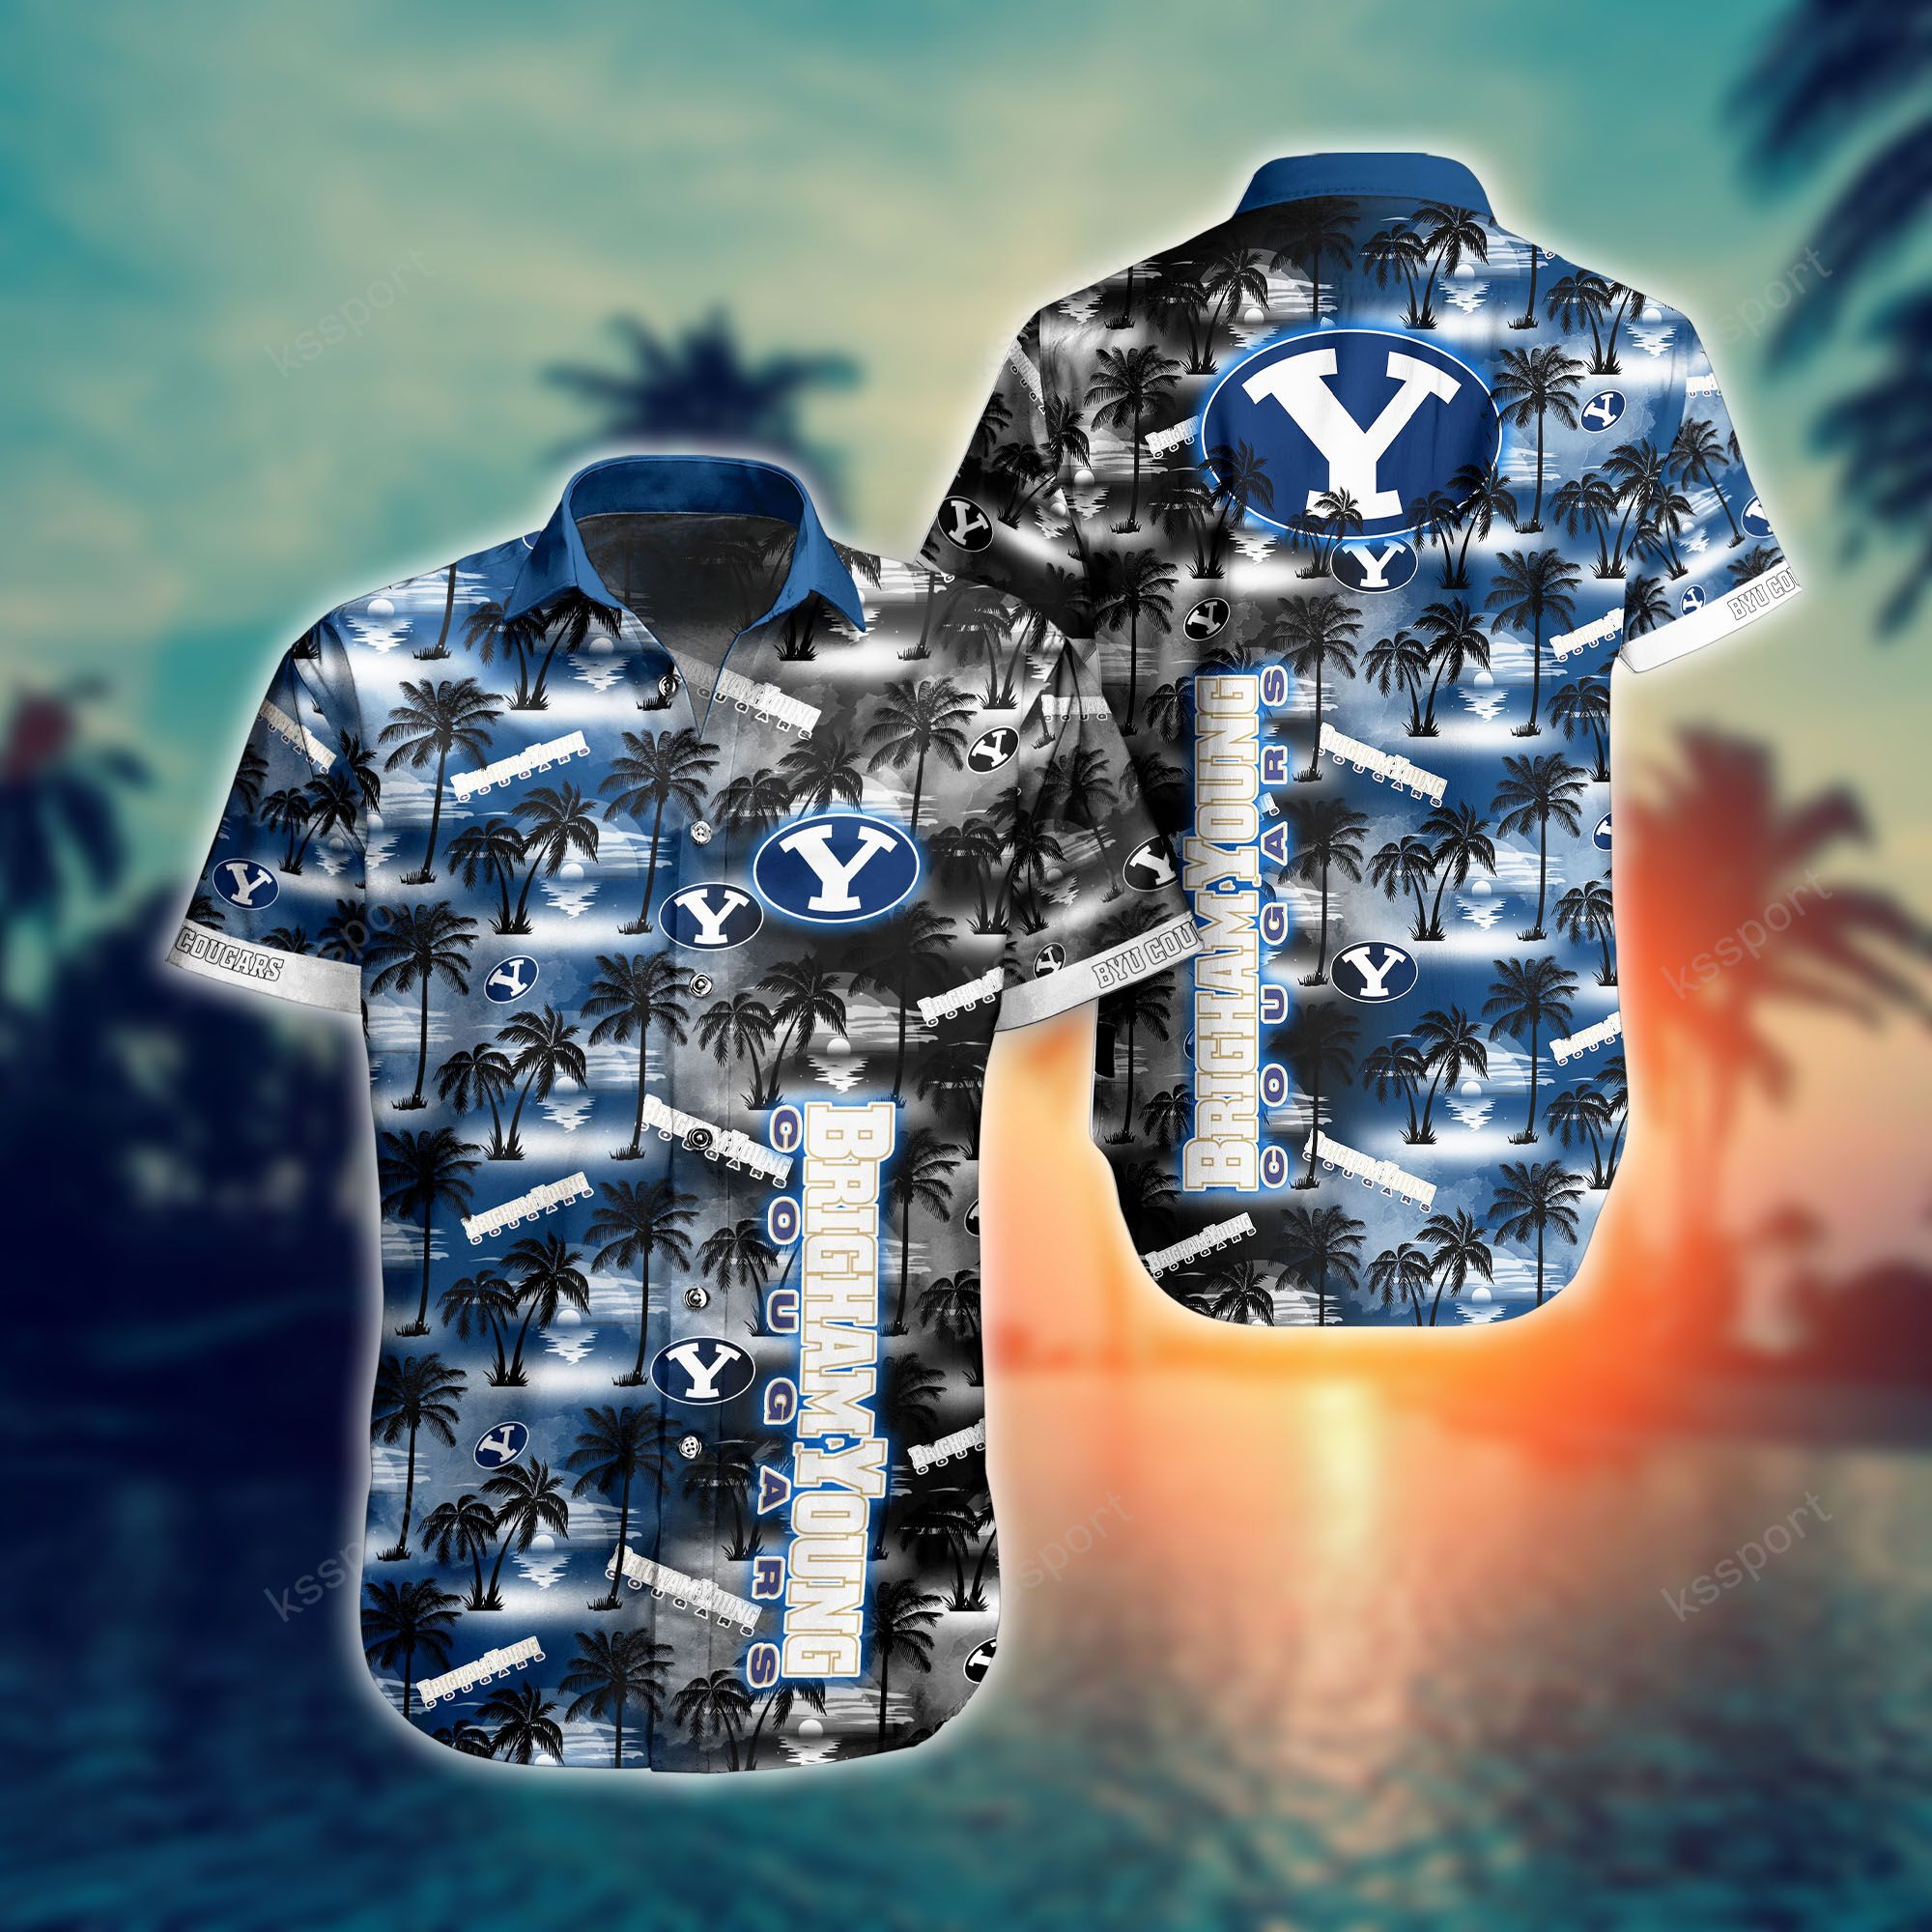 Treat yourself to a cool Hawaiian set today! 13